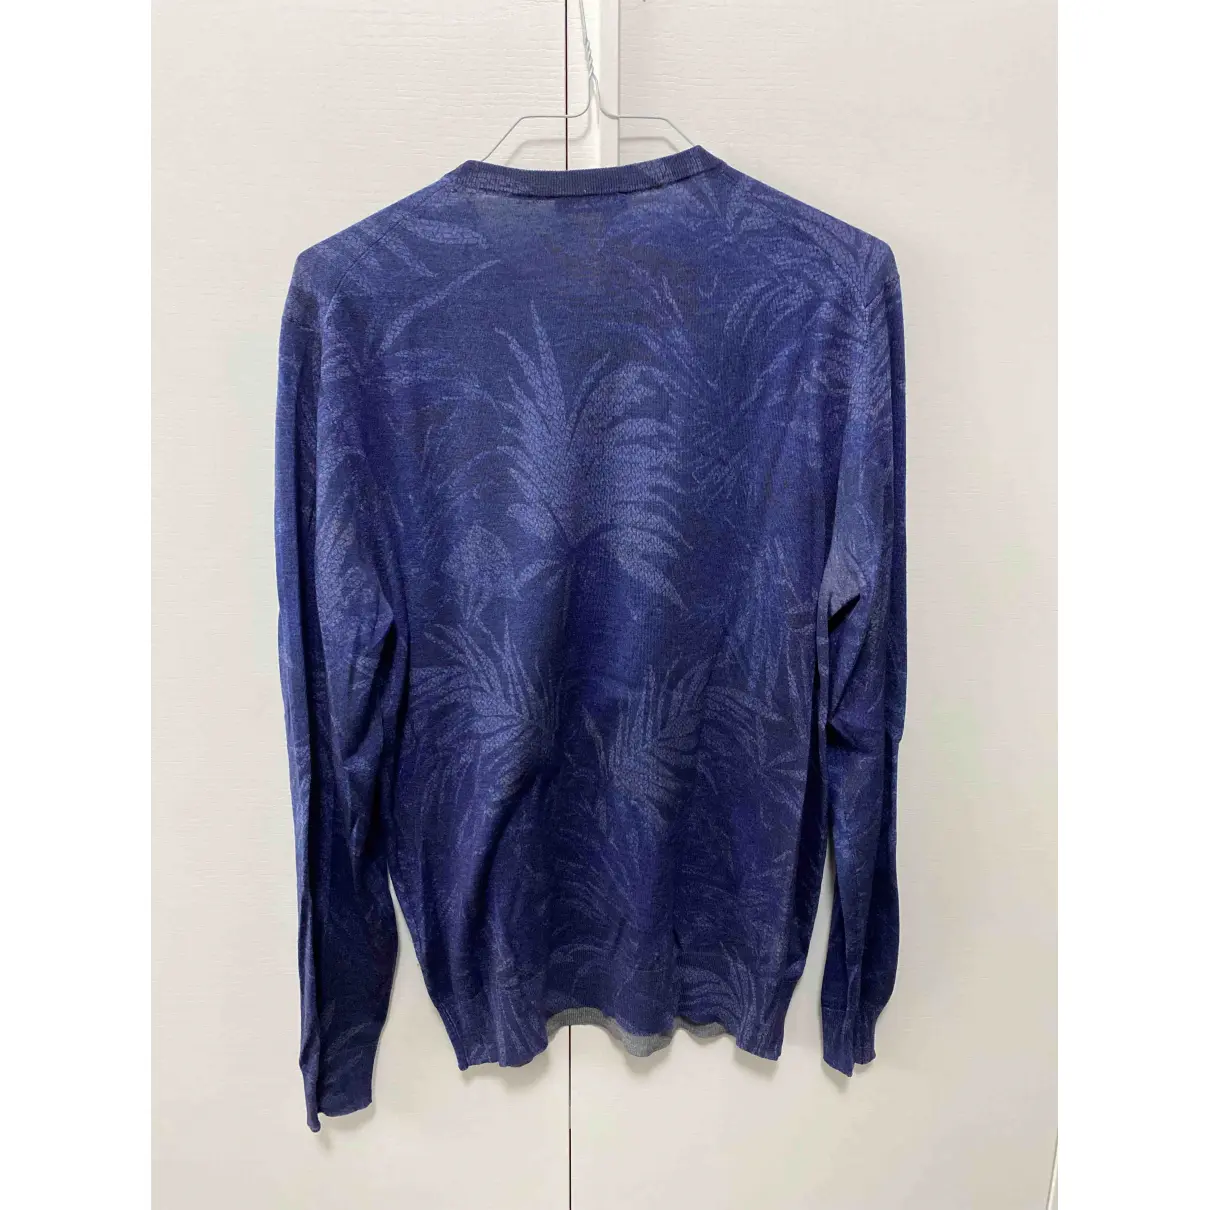 Buy Etro Cashmere pull online